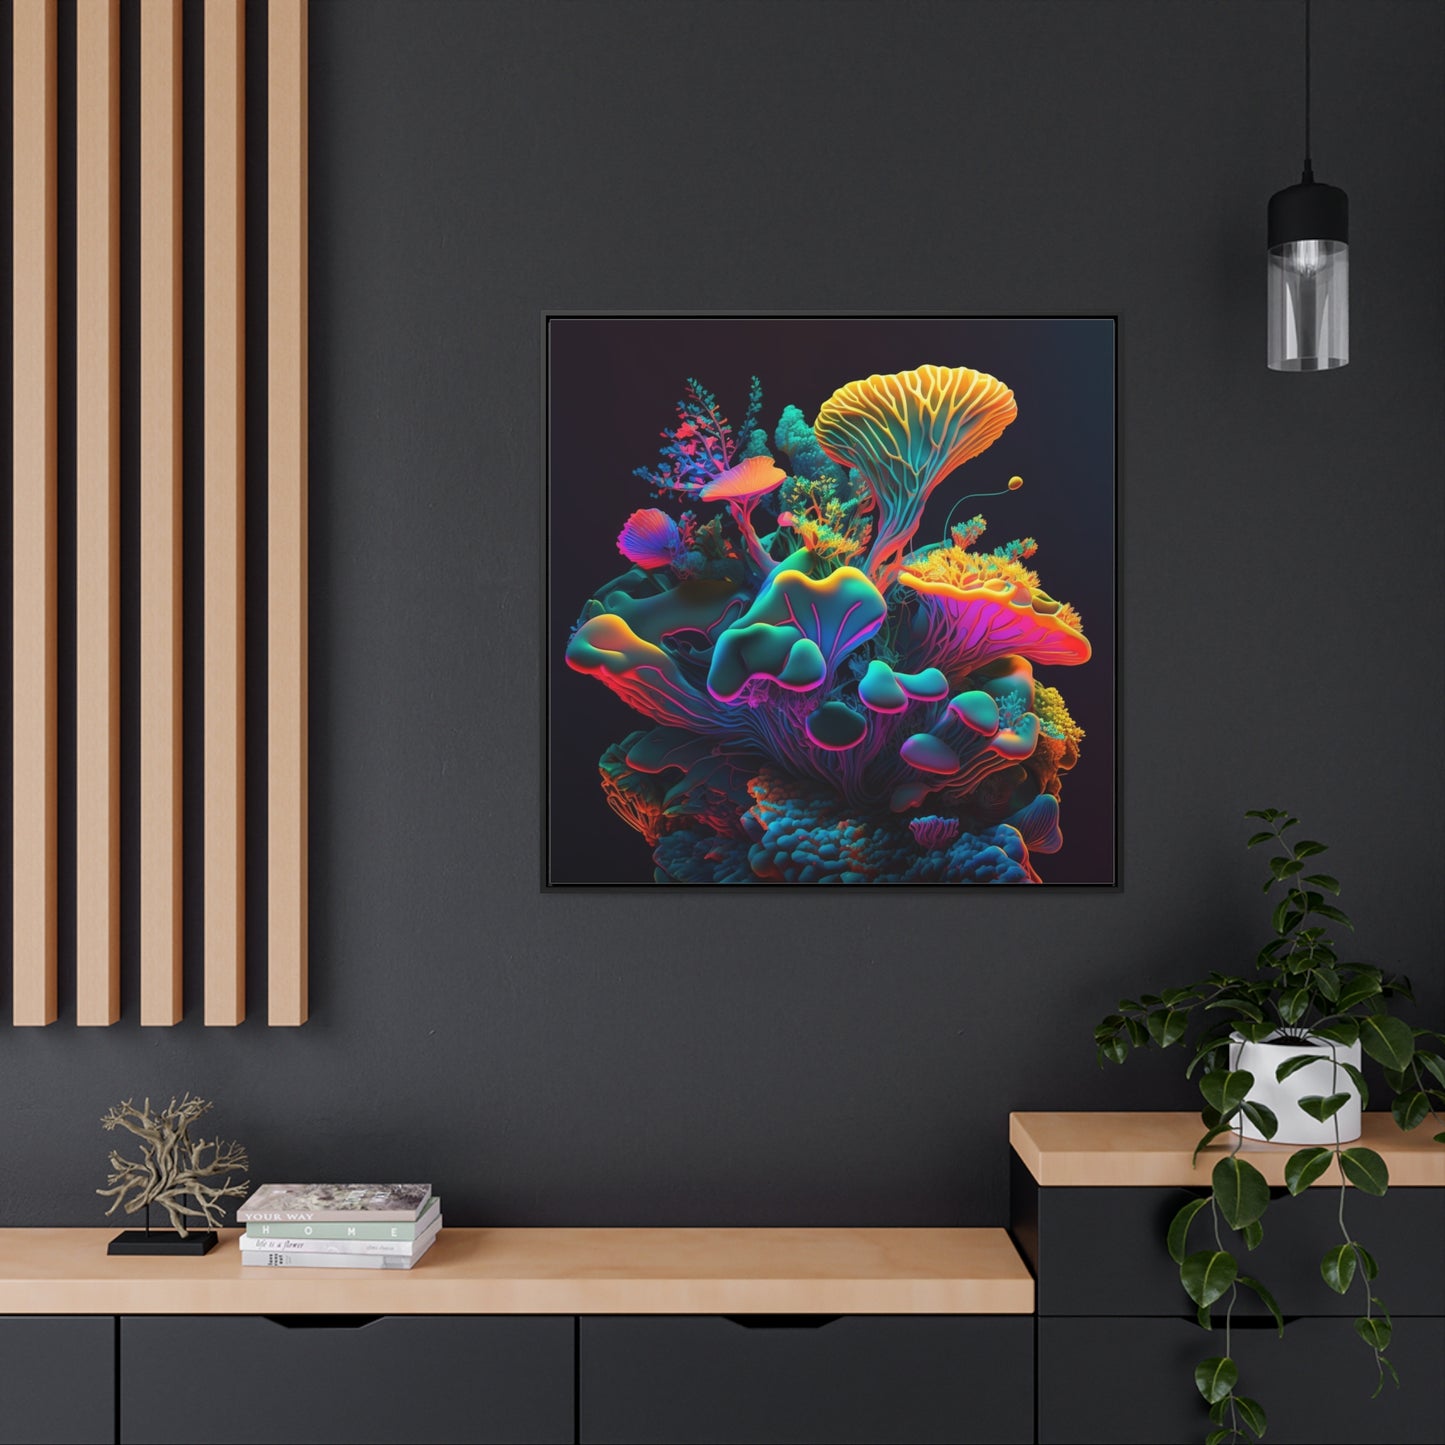 Gallery Canvas Wraps, Square Frame Macro Coral Reef 1